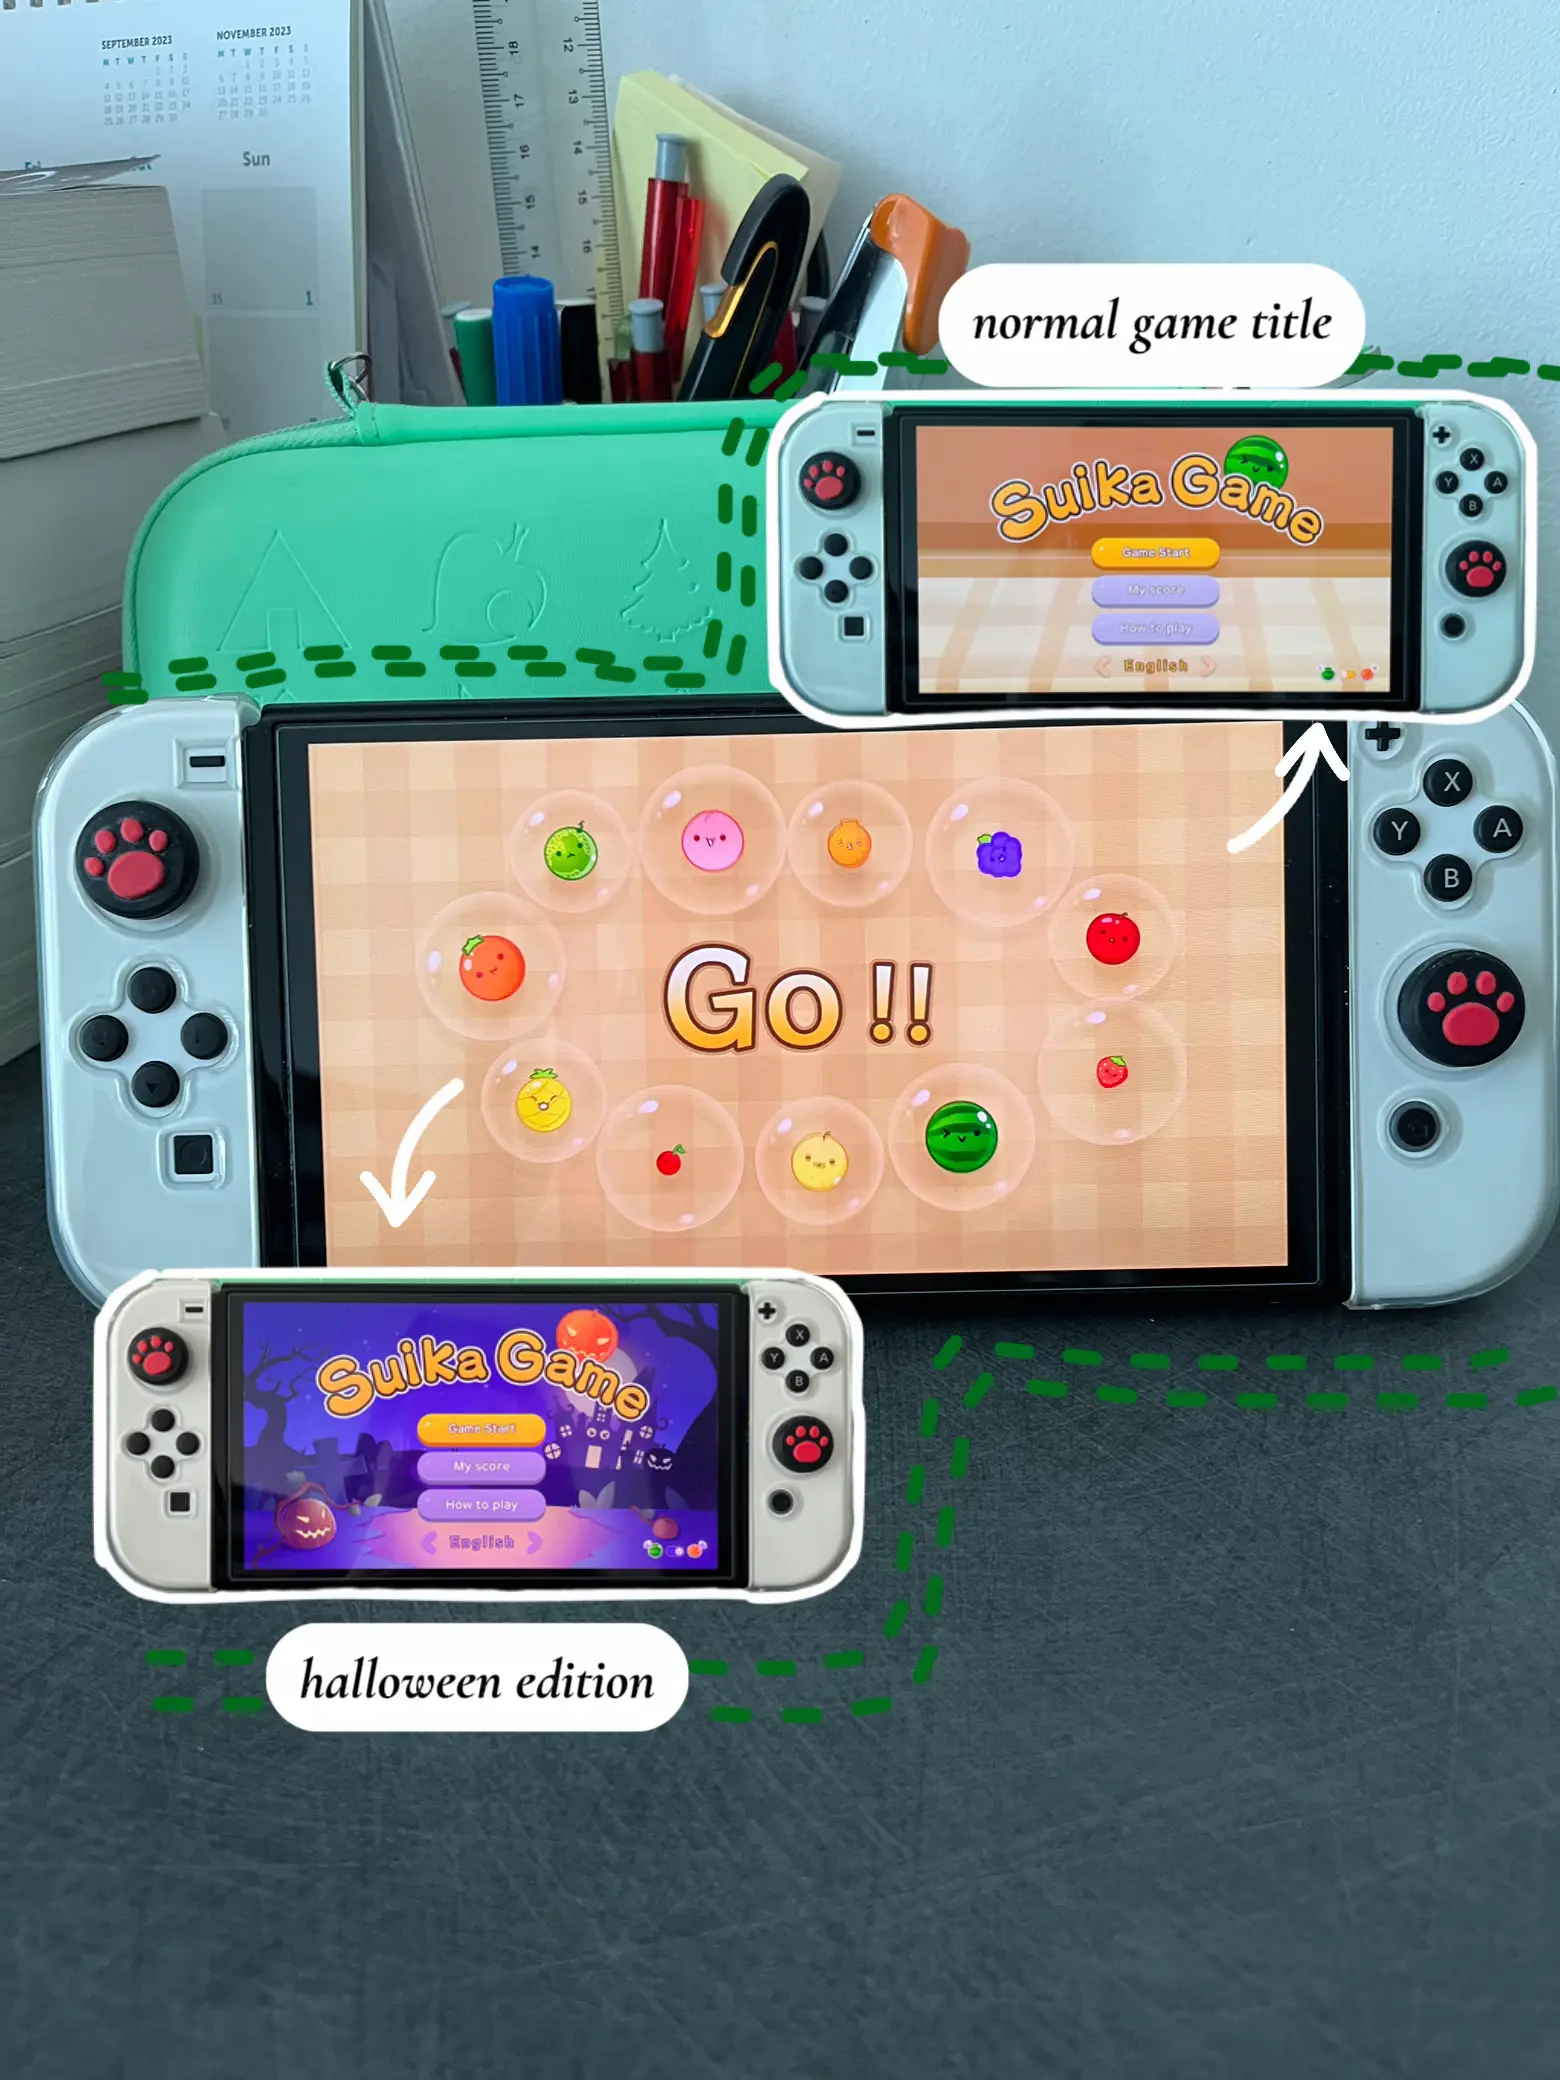 How To Download And Play Suika Game (Watermelon Game) On Nintendo Switch